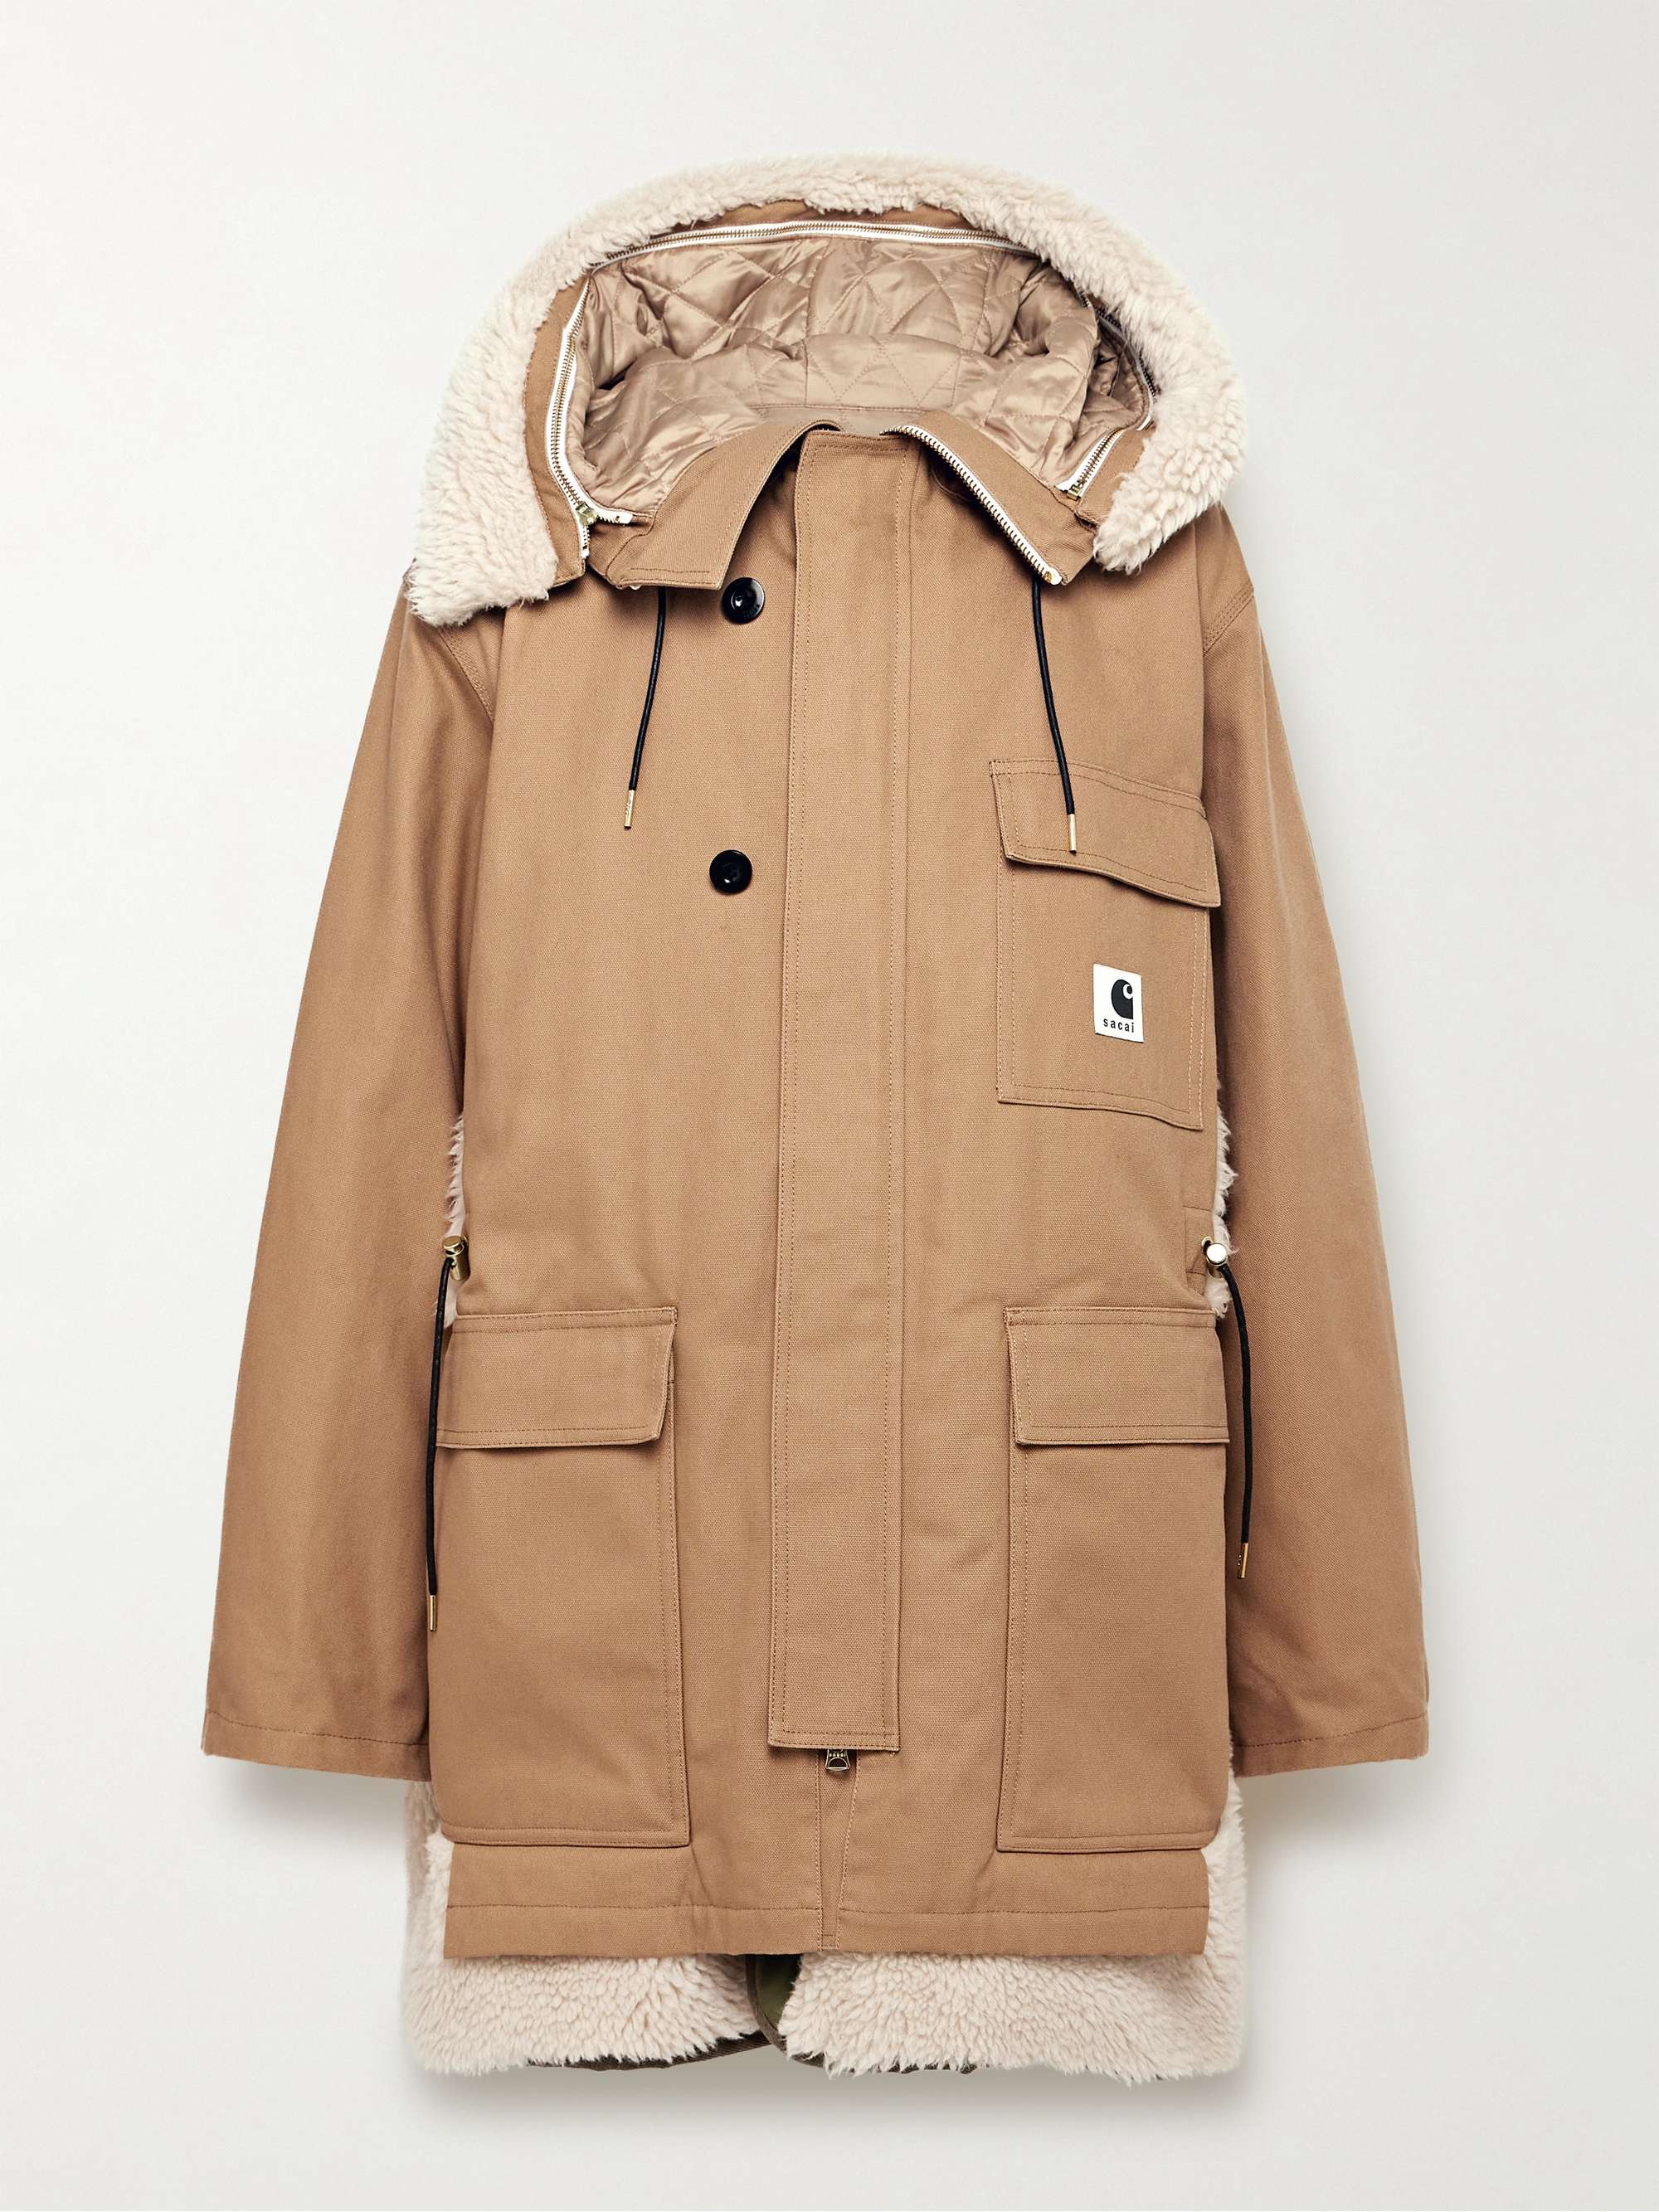 + Carhartt WIP Fleece-Trimmed Cotton and Nylon-Blend Canvas Hooded Parka